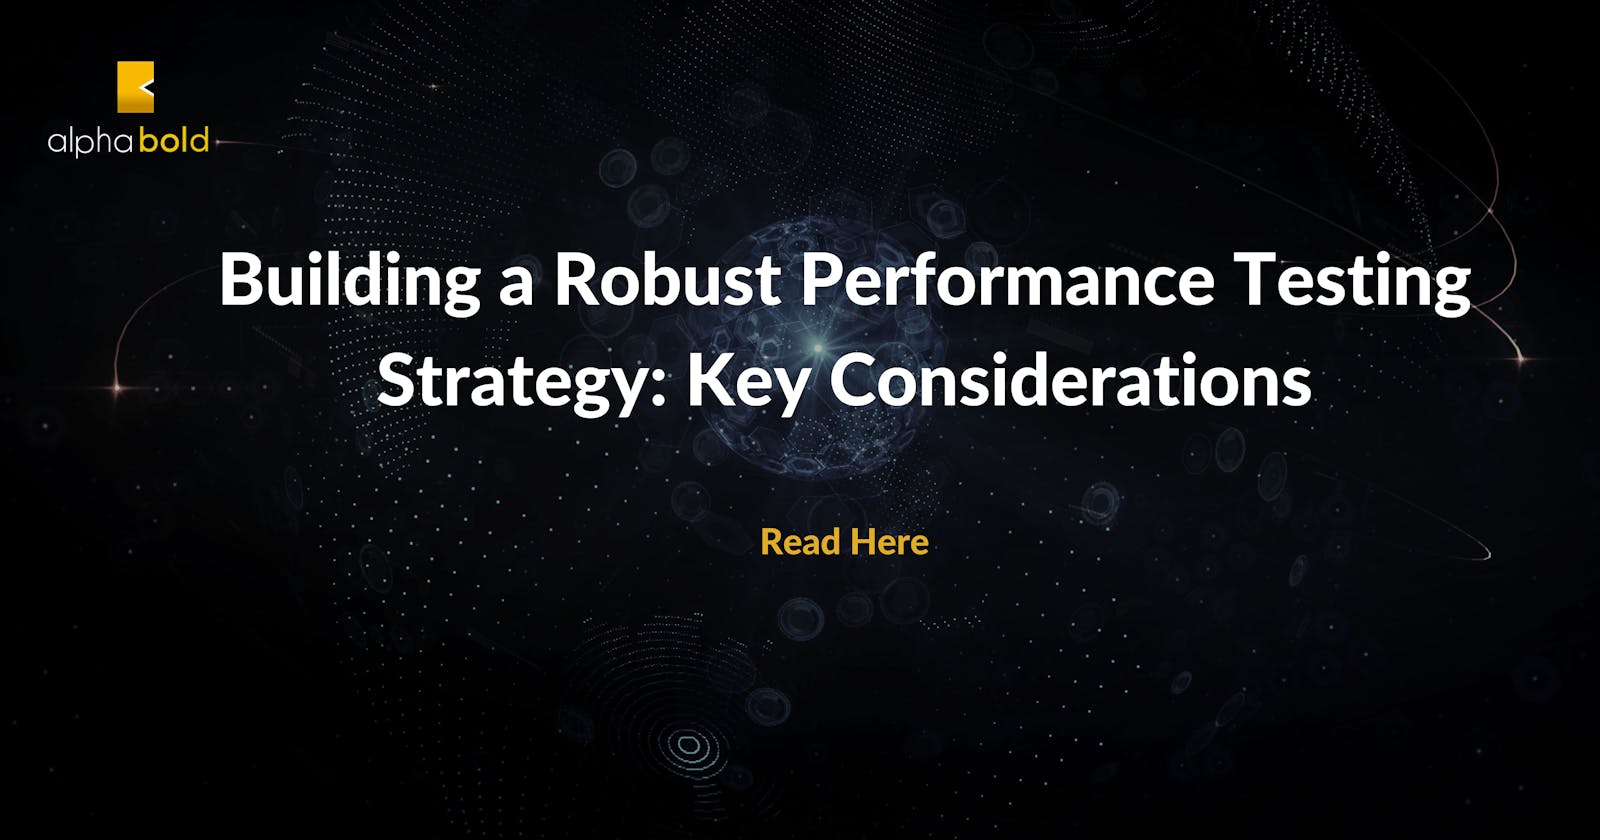 Building a Robust Performance Testing Strategy: Key Considerations